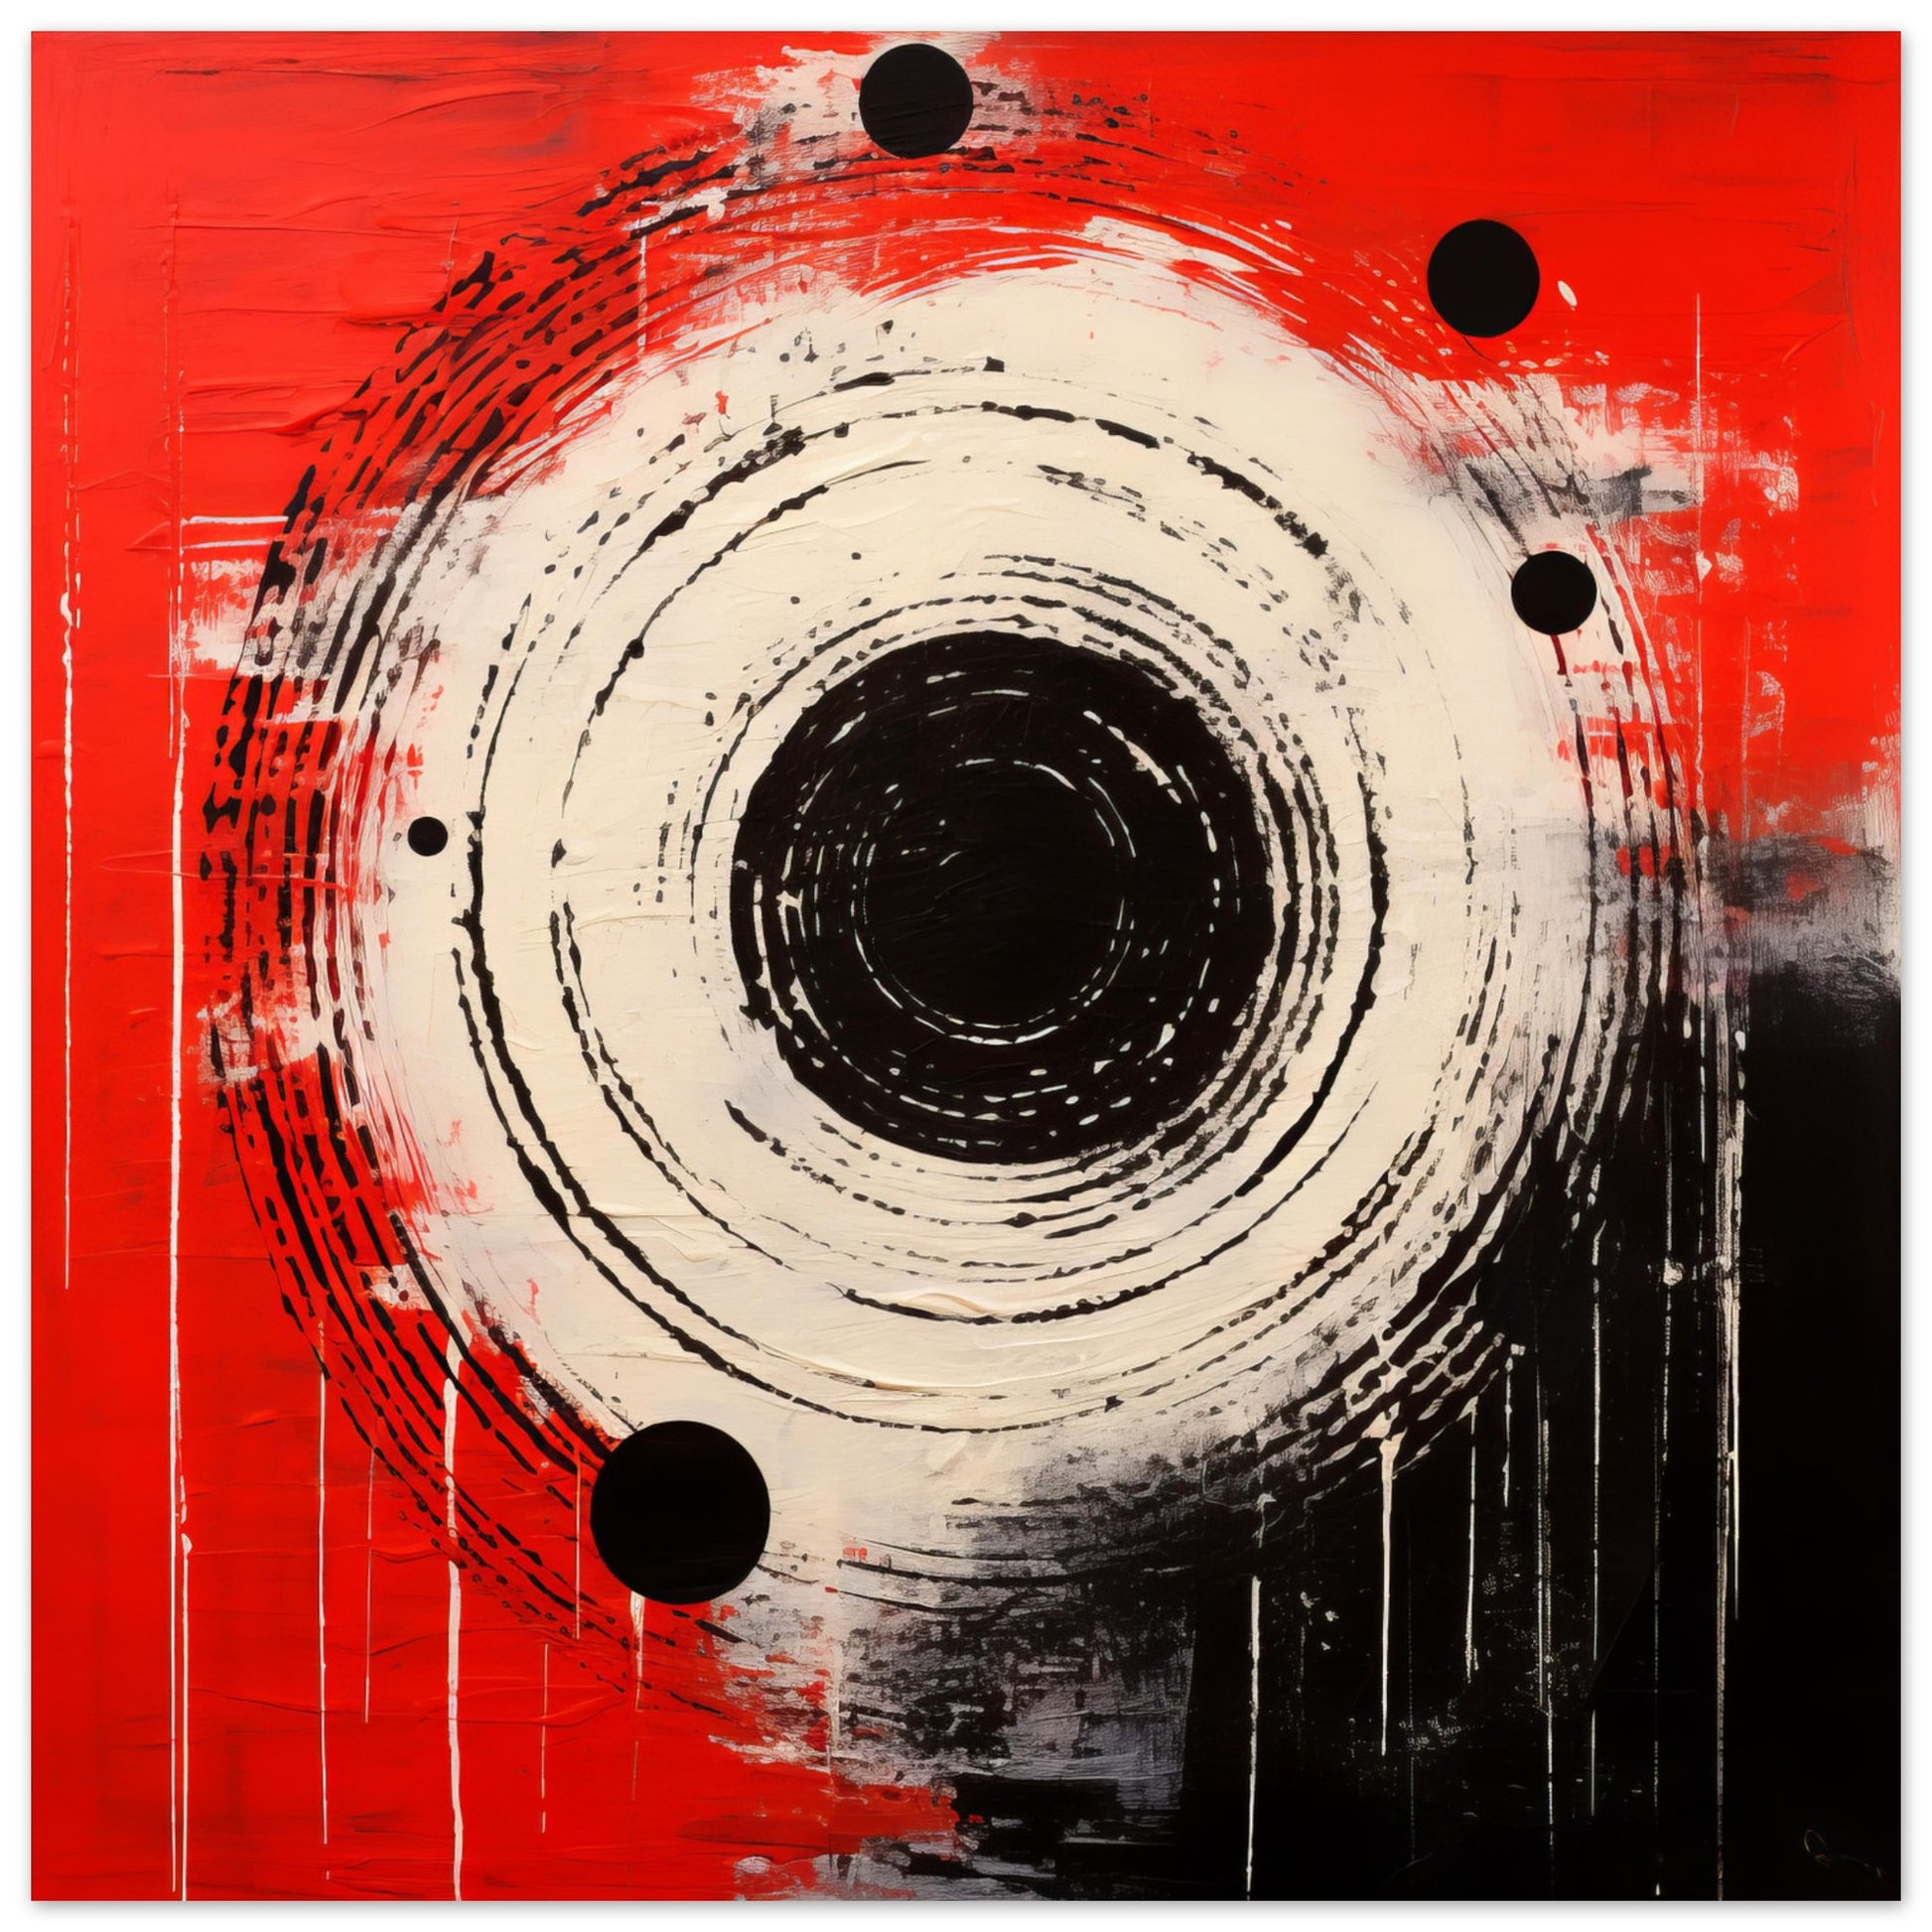 Abstract wall art titled "Bulls Eye," showcasing bold, concentric circles in black and white set against a fiery red backdrop. The piece is highlighted with expressive paint drips and black dots, exuding a sense of rustic elegance intertwined with modern design elements.